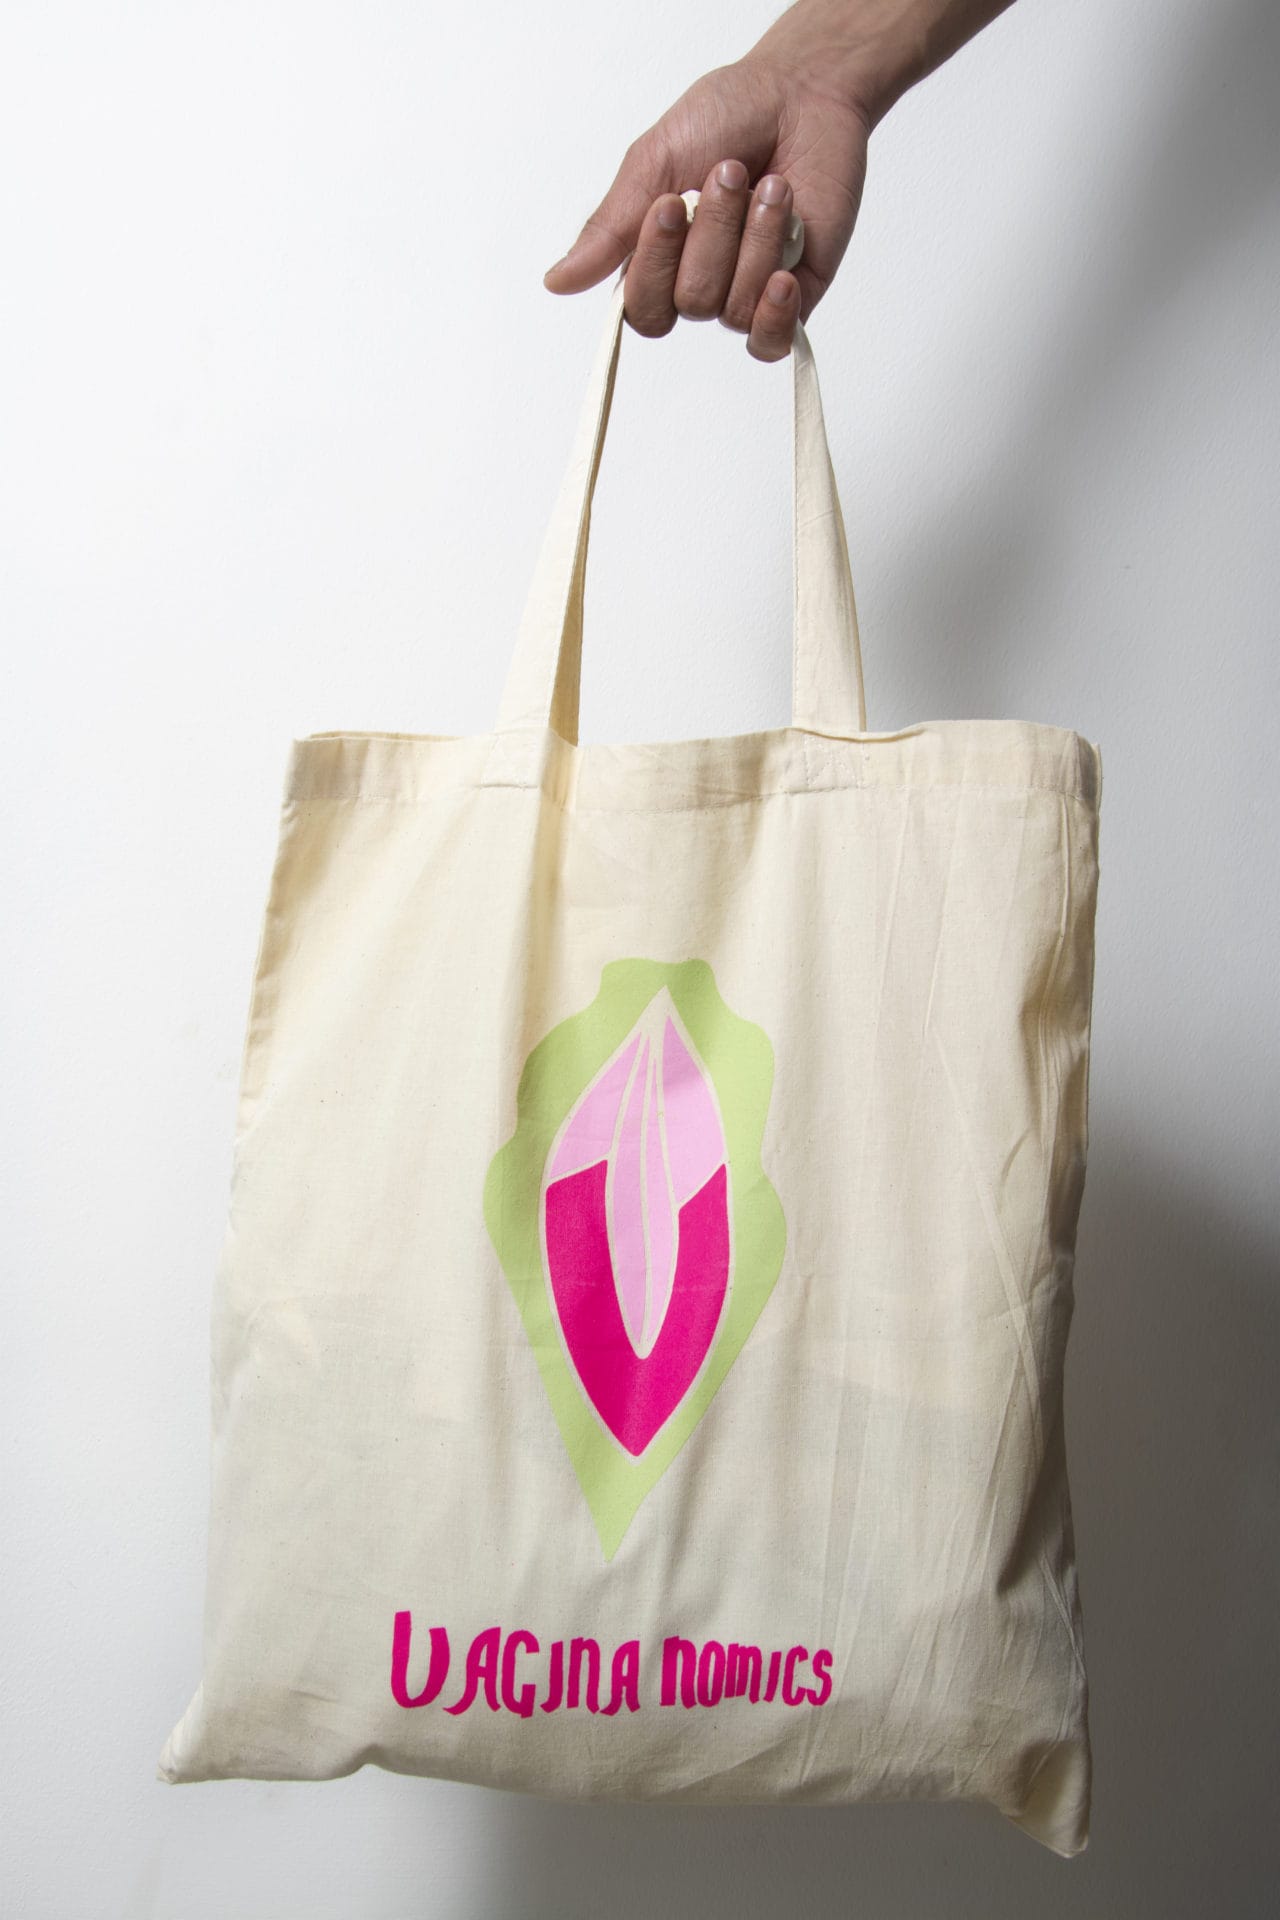 A tote bag with the print of the logo of Vagina-nomics on it.